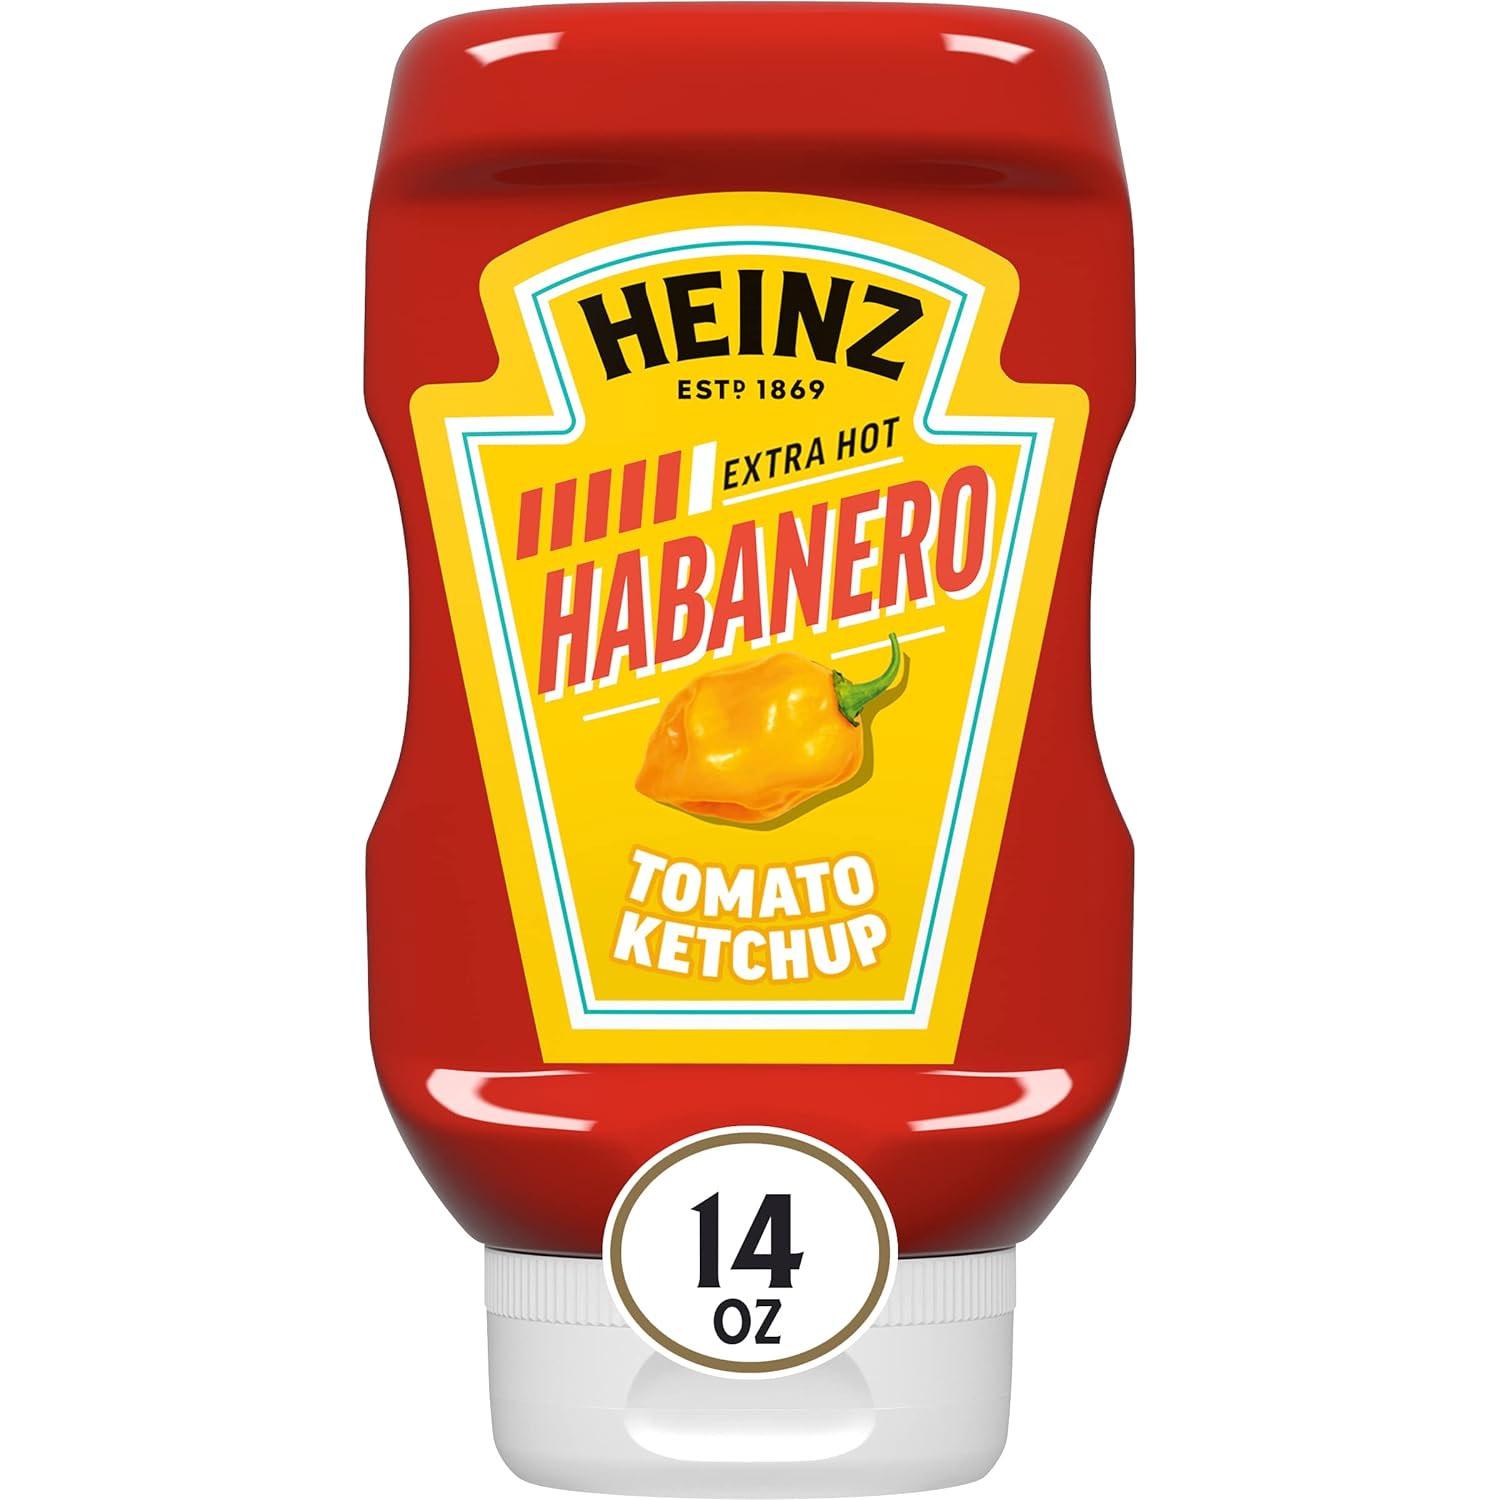 Heinz Tomato Ketchup Blended with Habanero for $2.37 Shipped